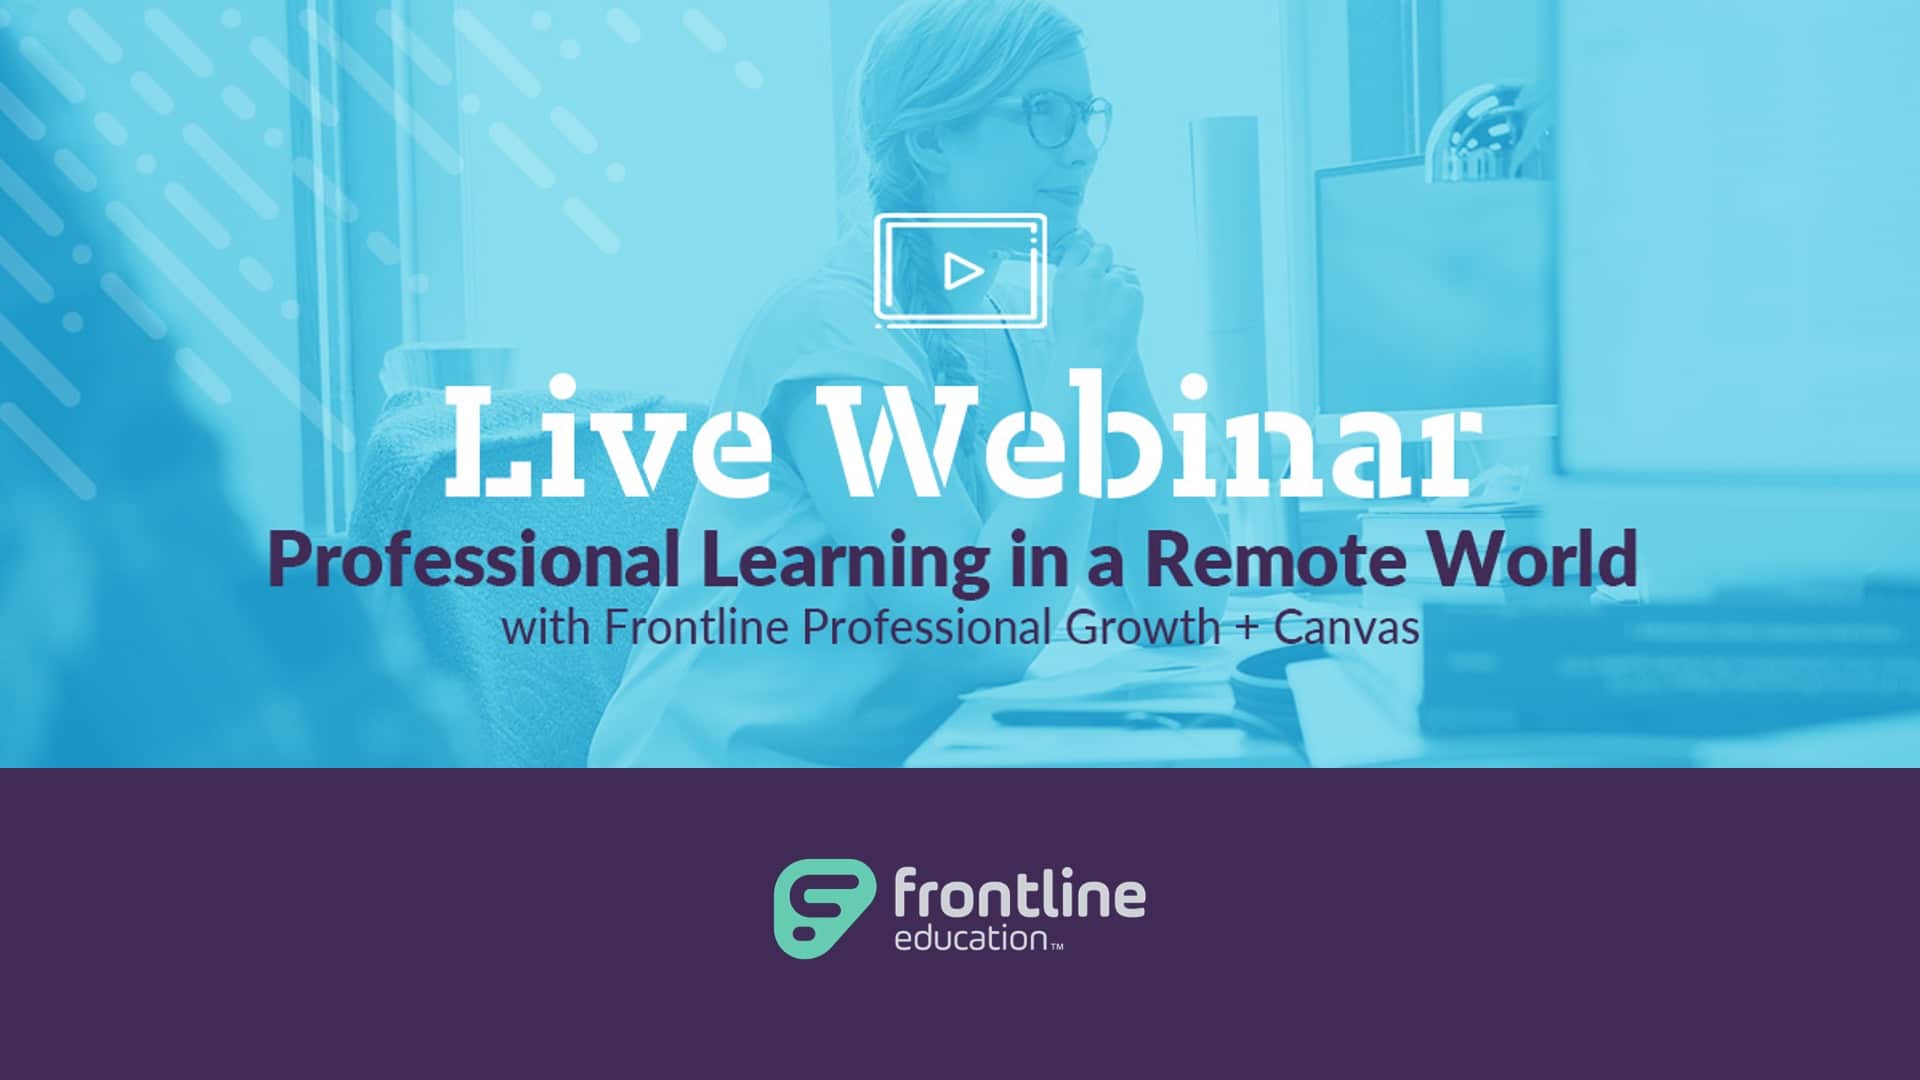 Professional Learning in a Remote World with Frontline Professional Growth & Canvas